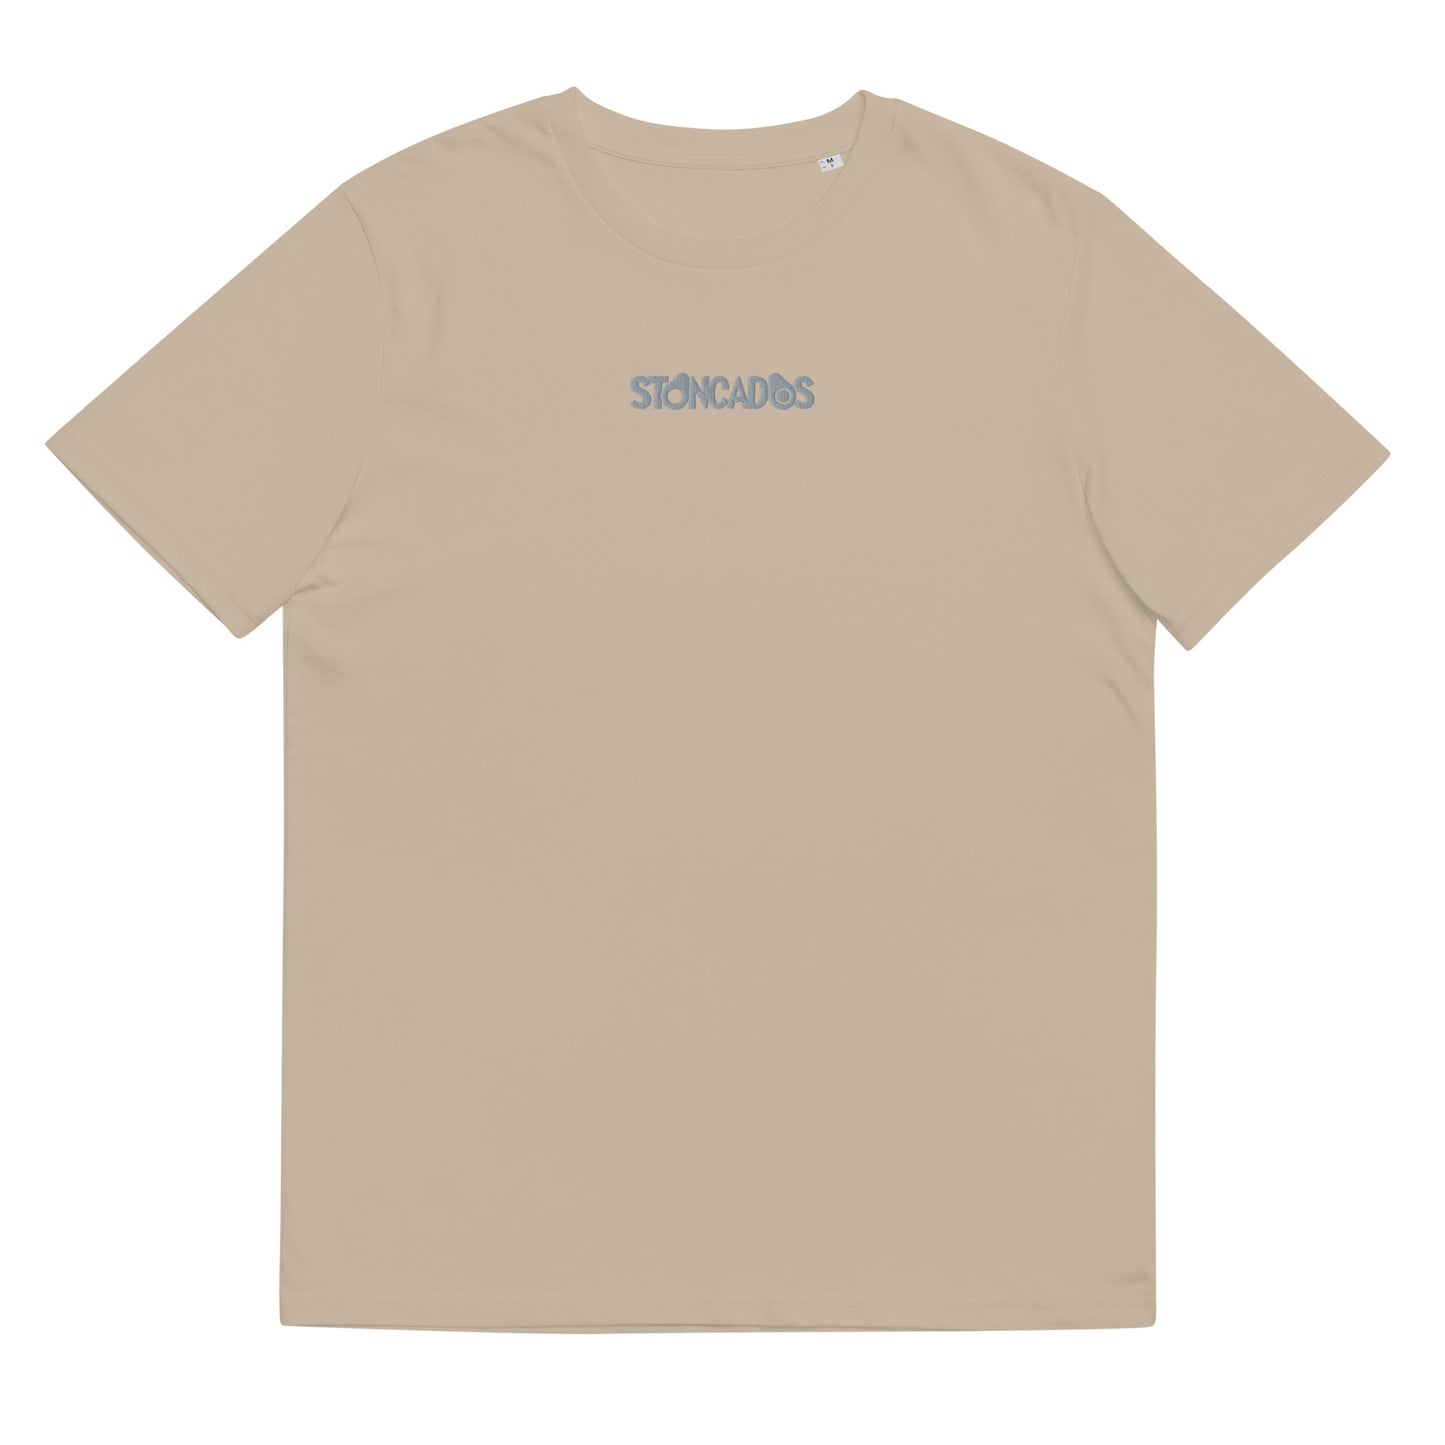 Unisex organic cotton t-shirt REAR PRINT + FRONT EMBROIDERED LOGO feat Stoncados